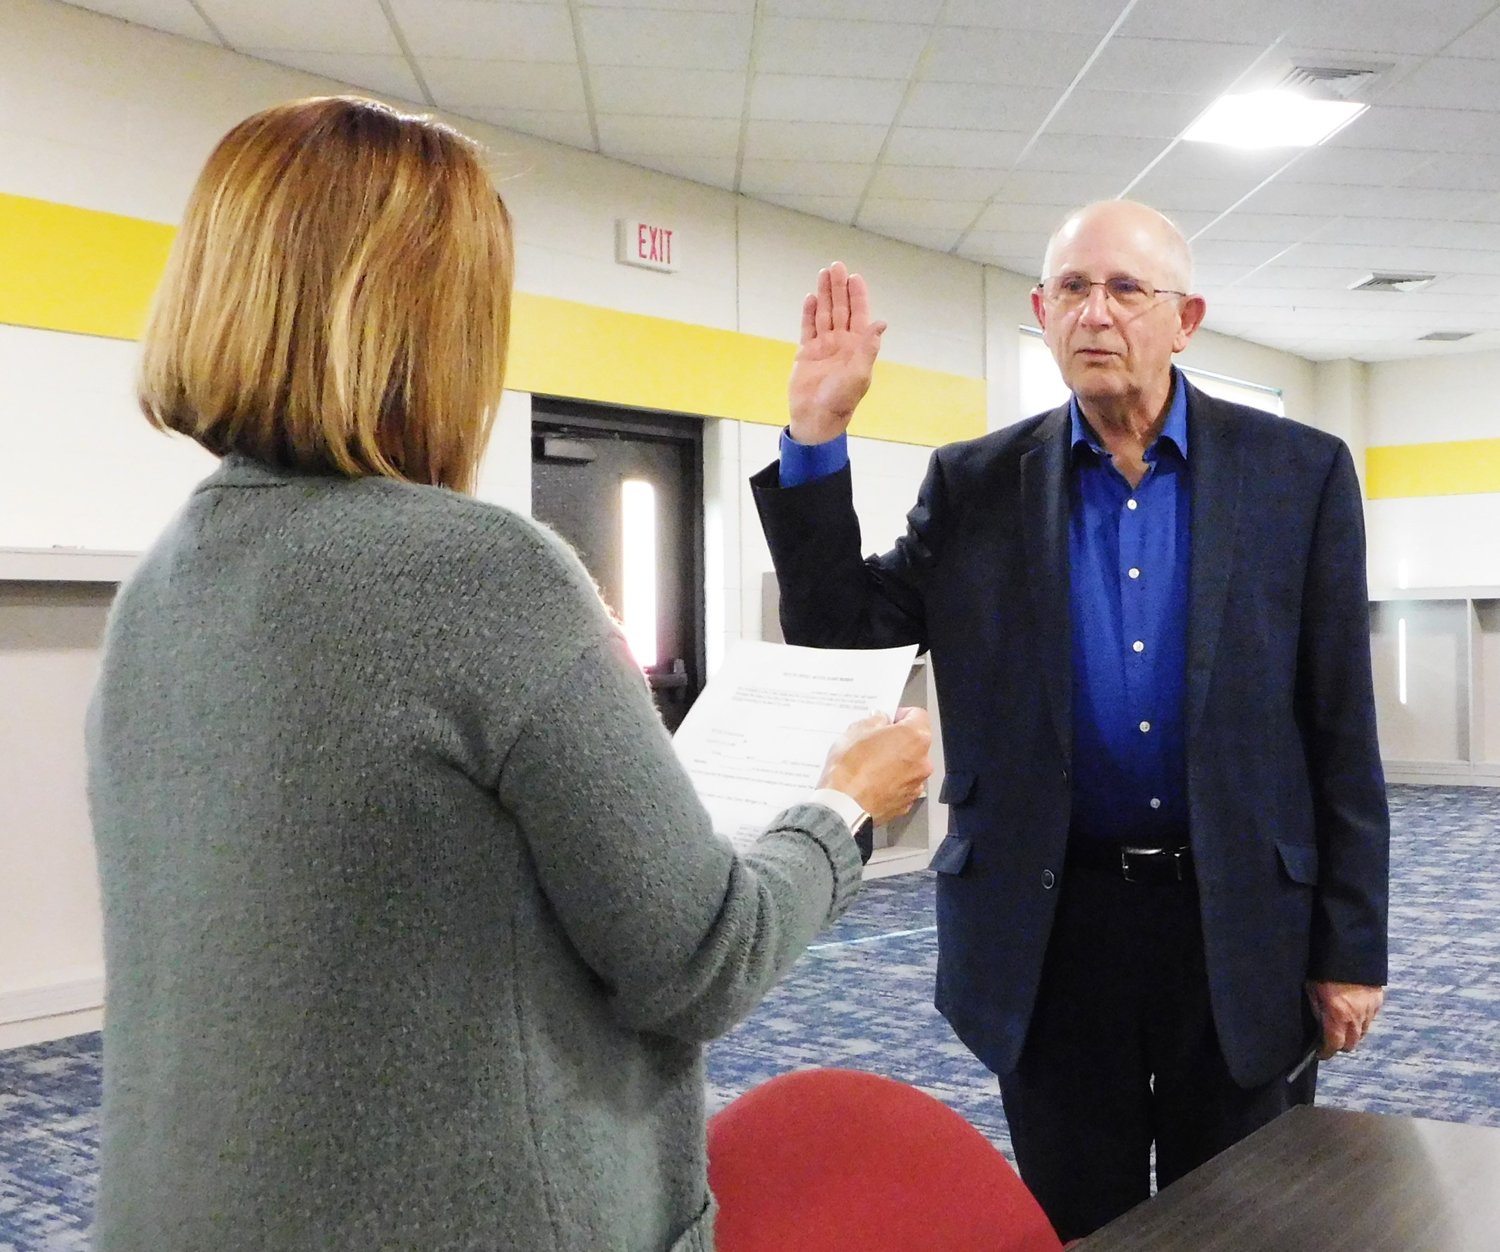 Newly-appointed HCS Board of Education Trustee Tom House takes the oath of office immediately following the special meeting held to interview candidates.